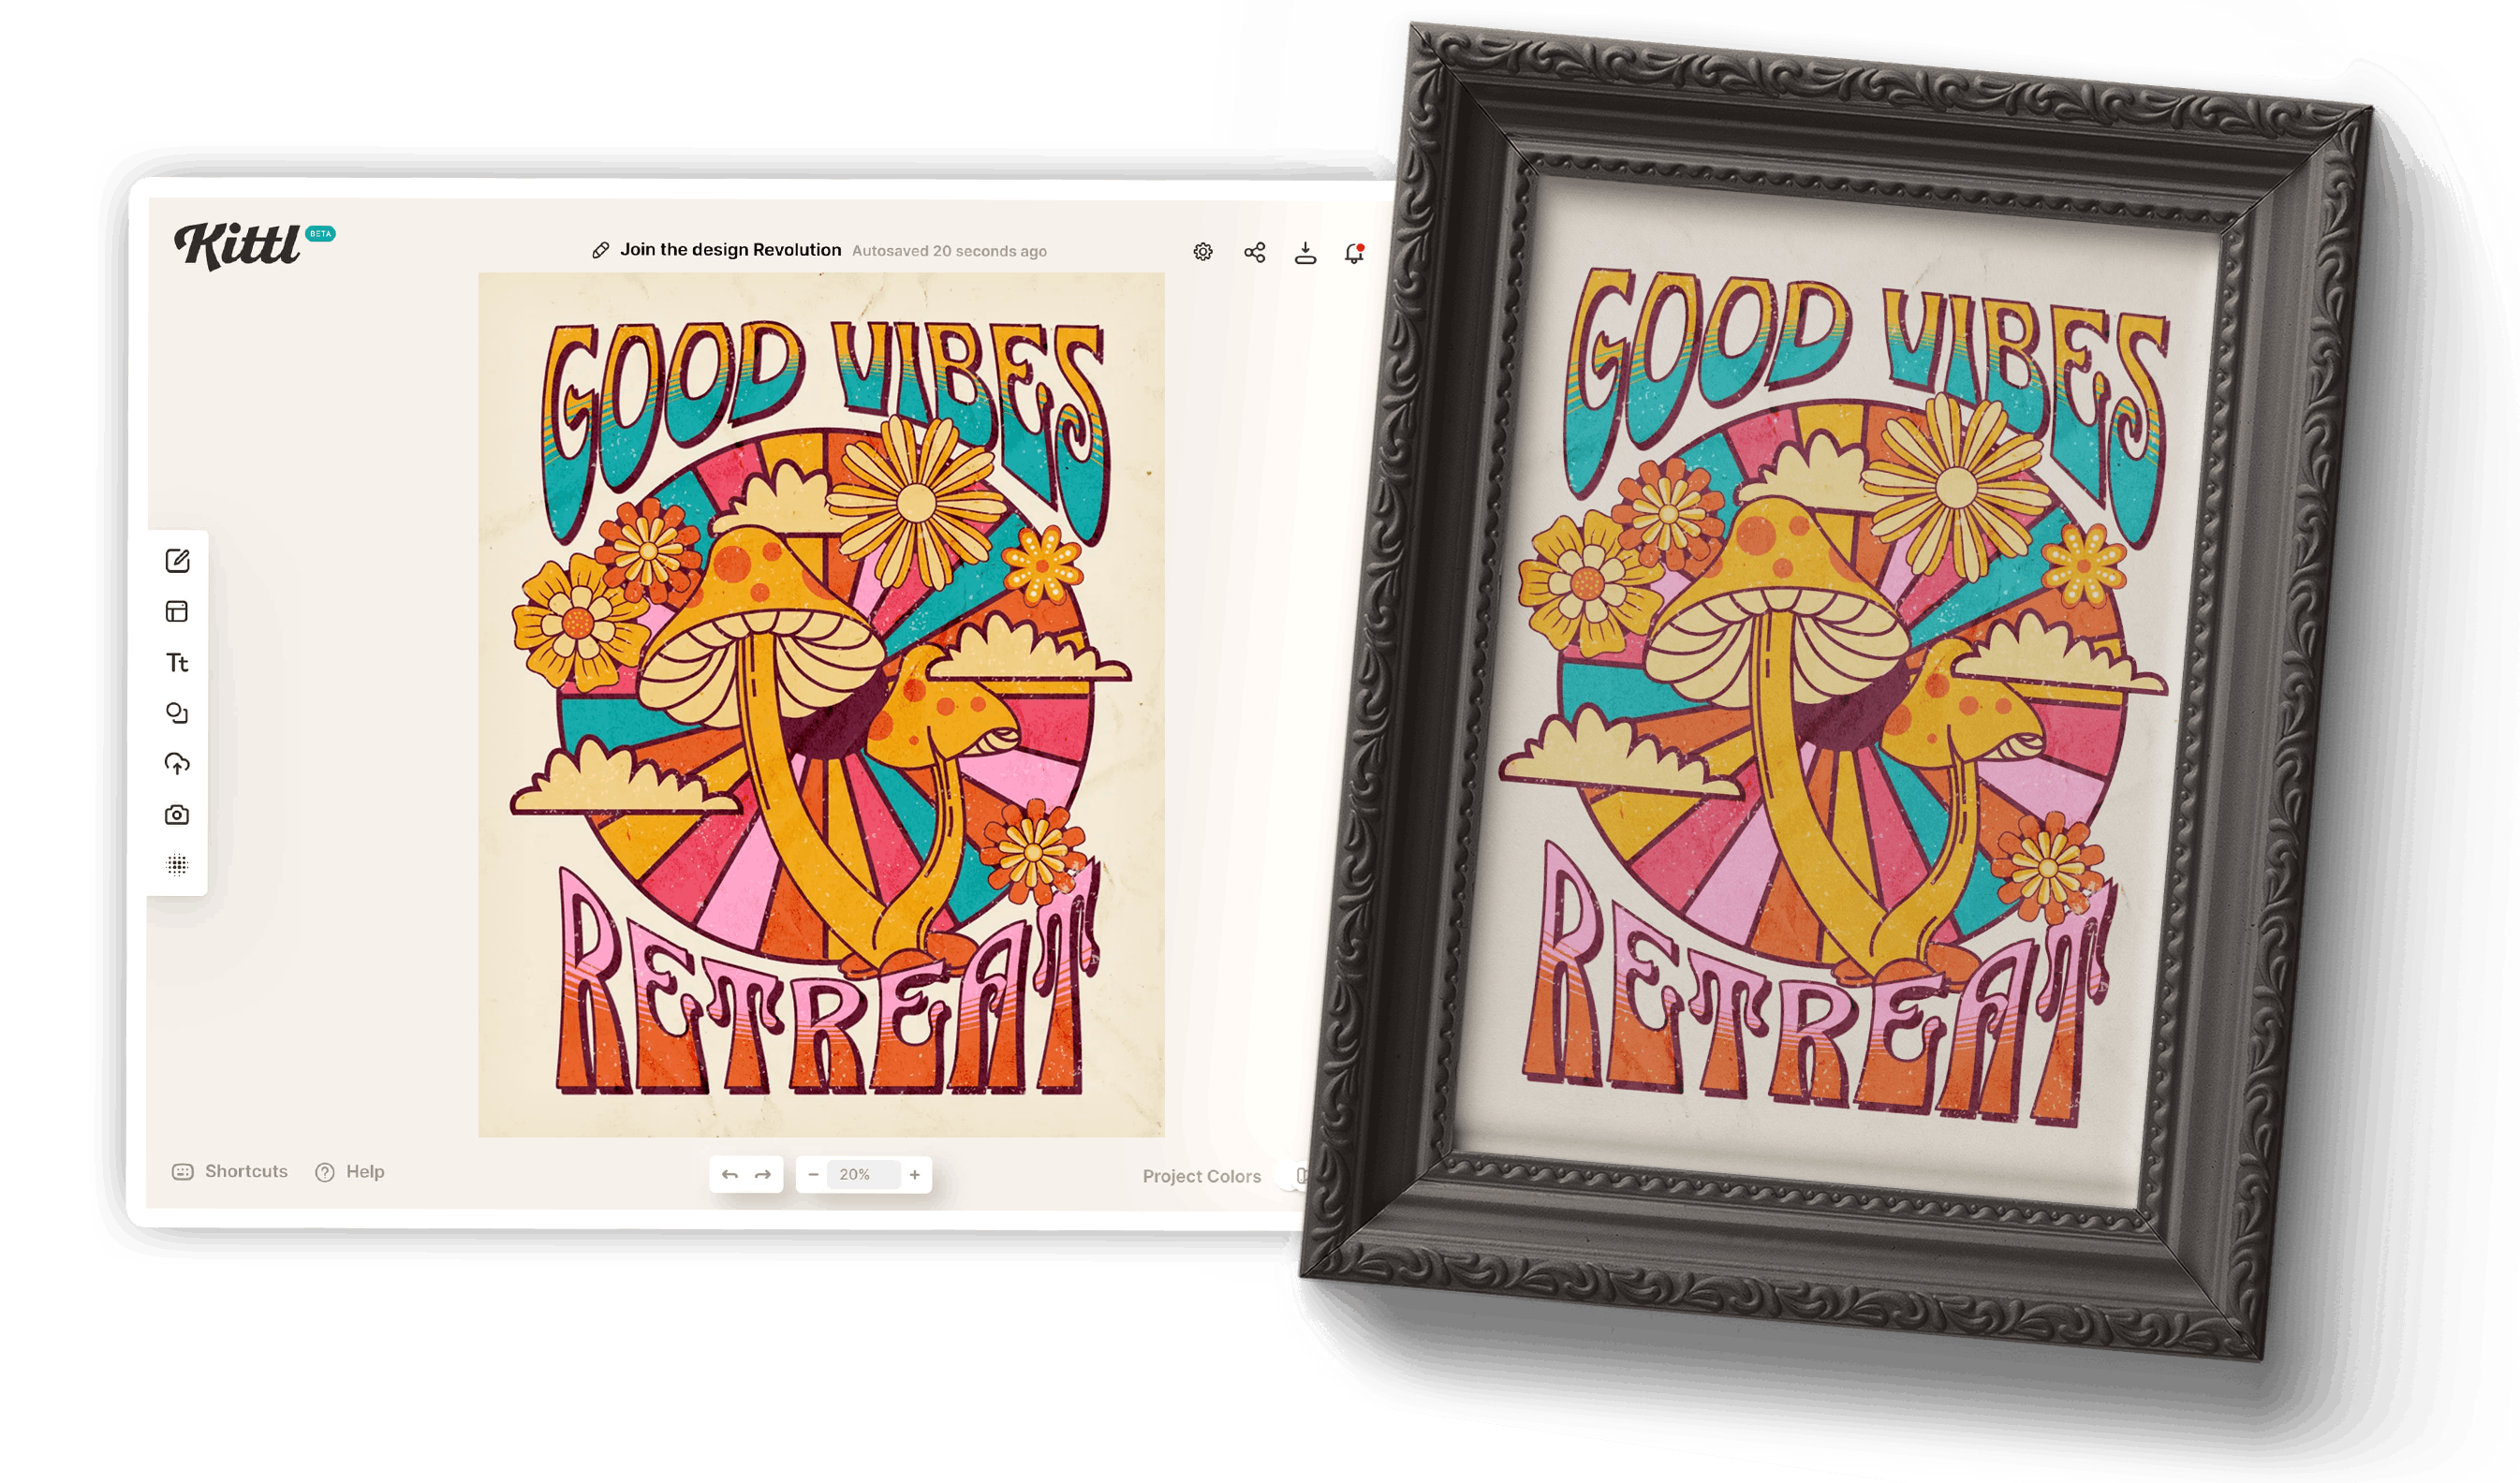 Psychedelic Kittl to printed poster design.